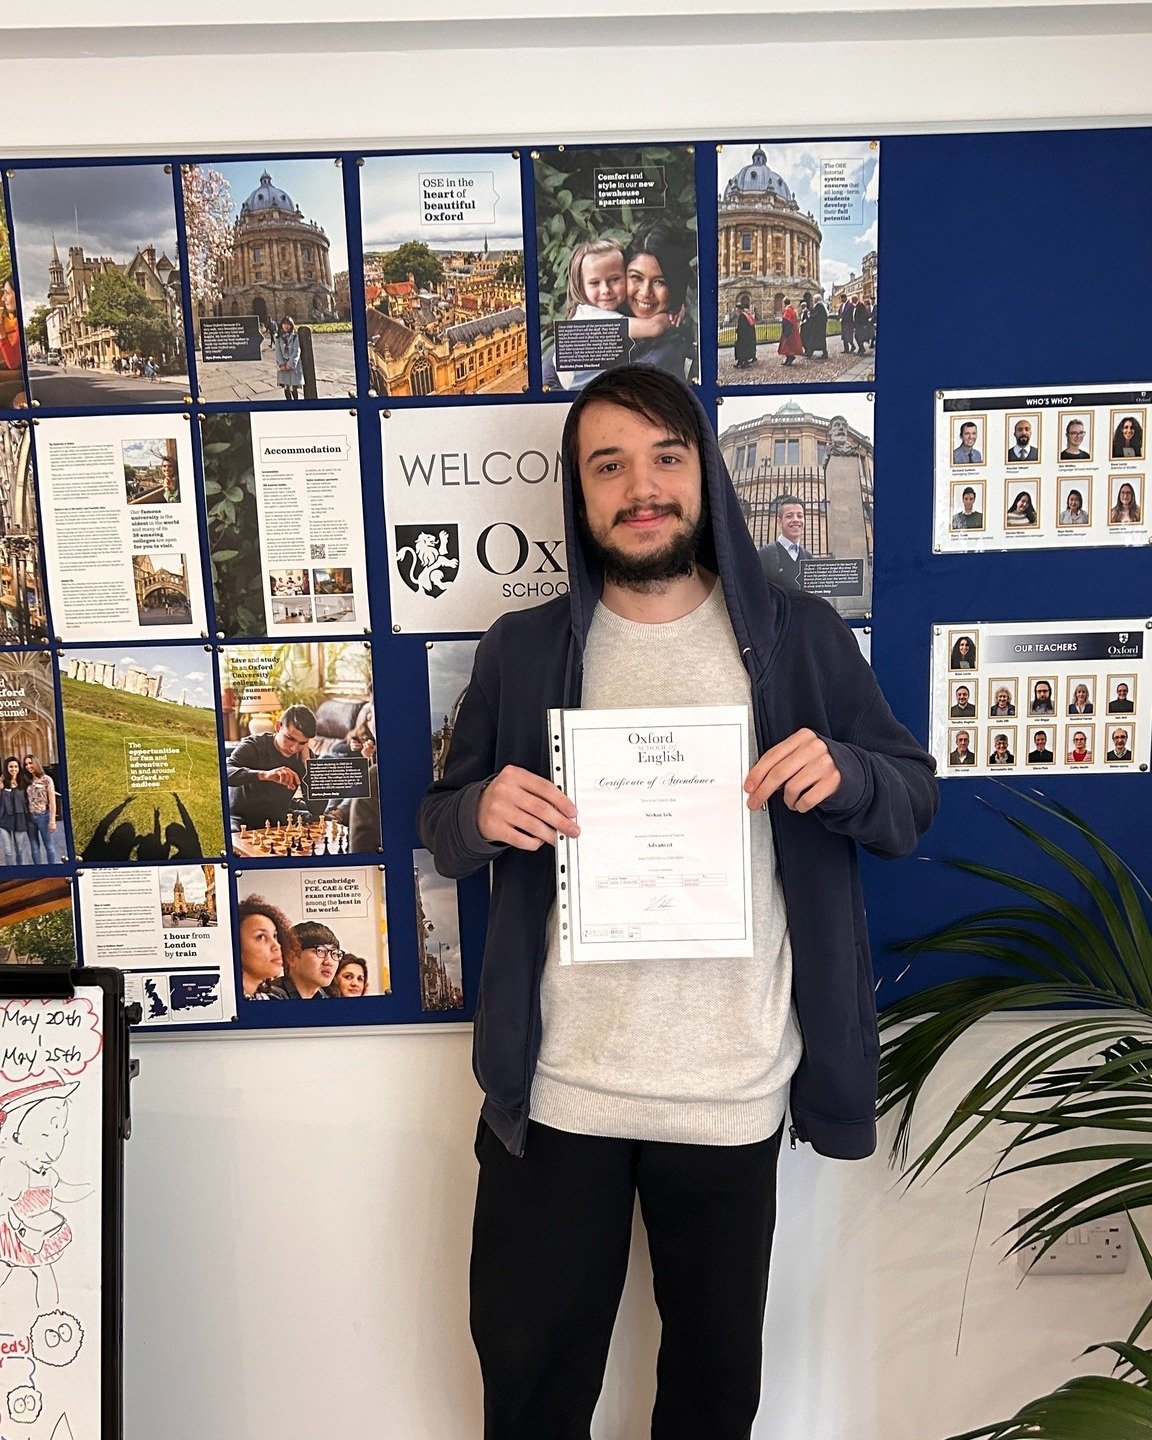 ☁Last day for Serhan here at OSE☹️

Serhan, from Istanbul, Turkey, was here since the beginning of March and was enrolled for 2 months and half! 

We are proud of how far you have come, and we wish you all the best in your bright future!😇

 #studyab